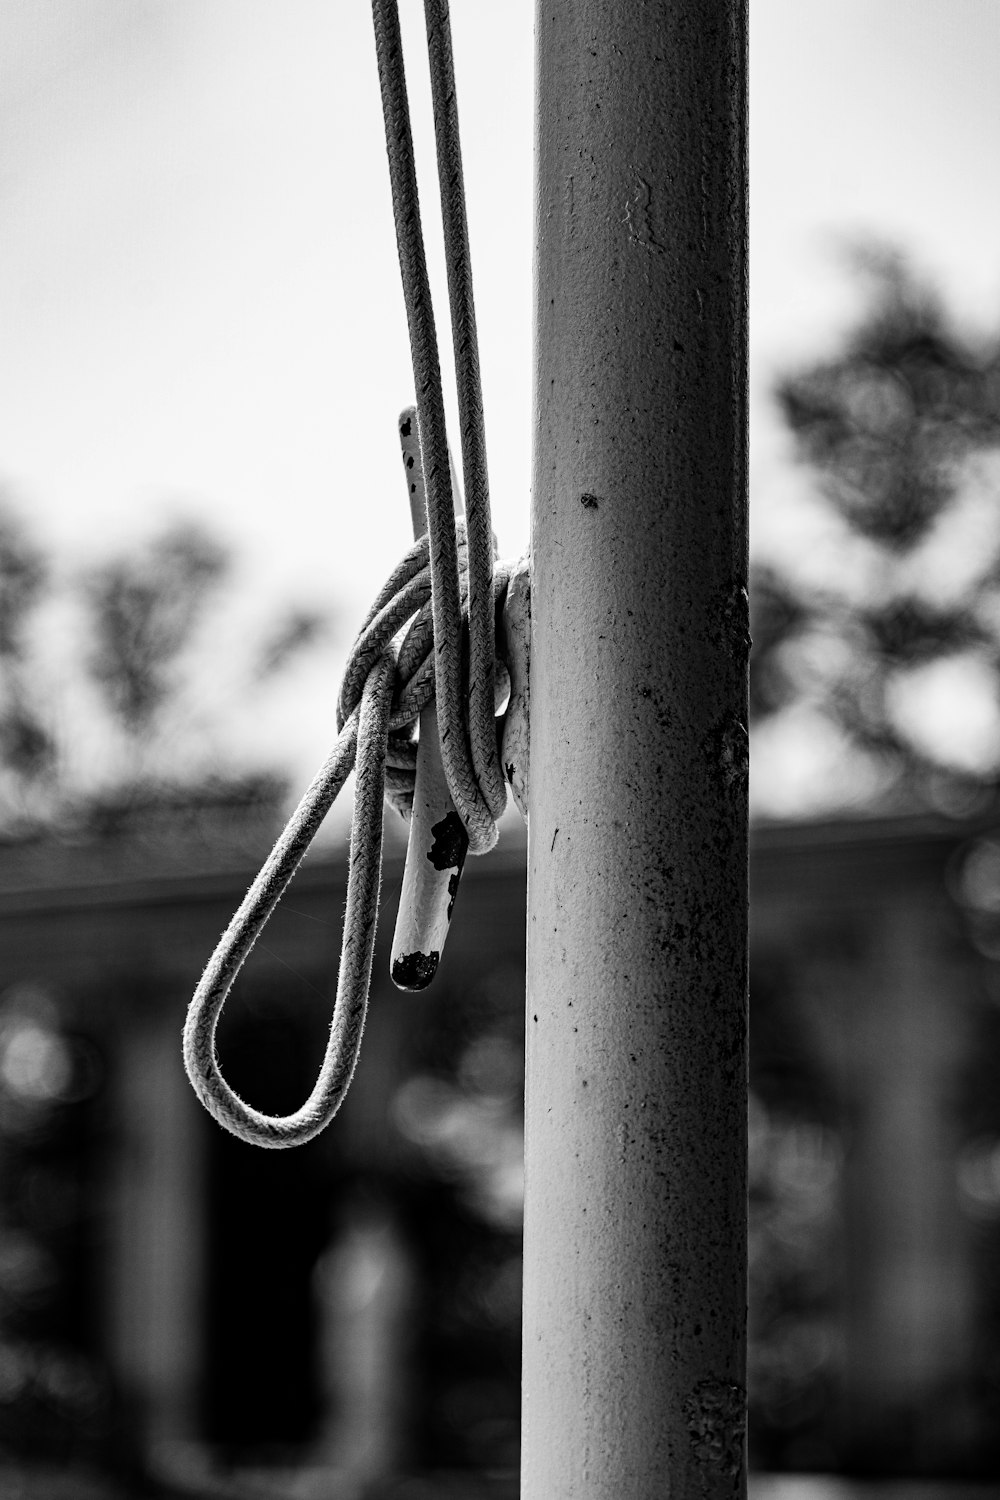 a close up of a pole with a rope on it